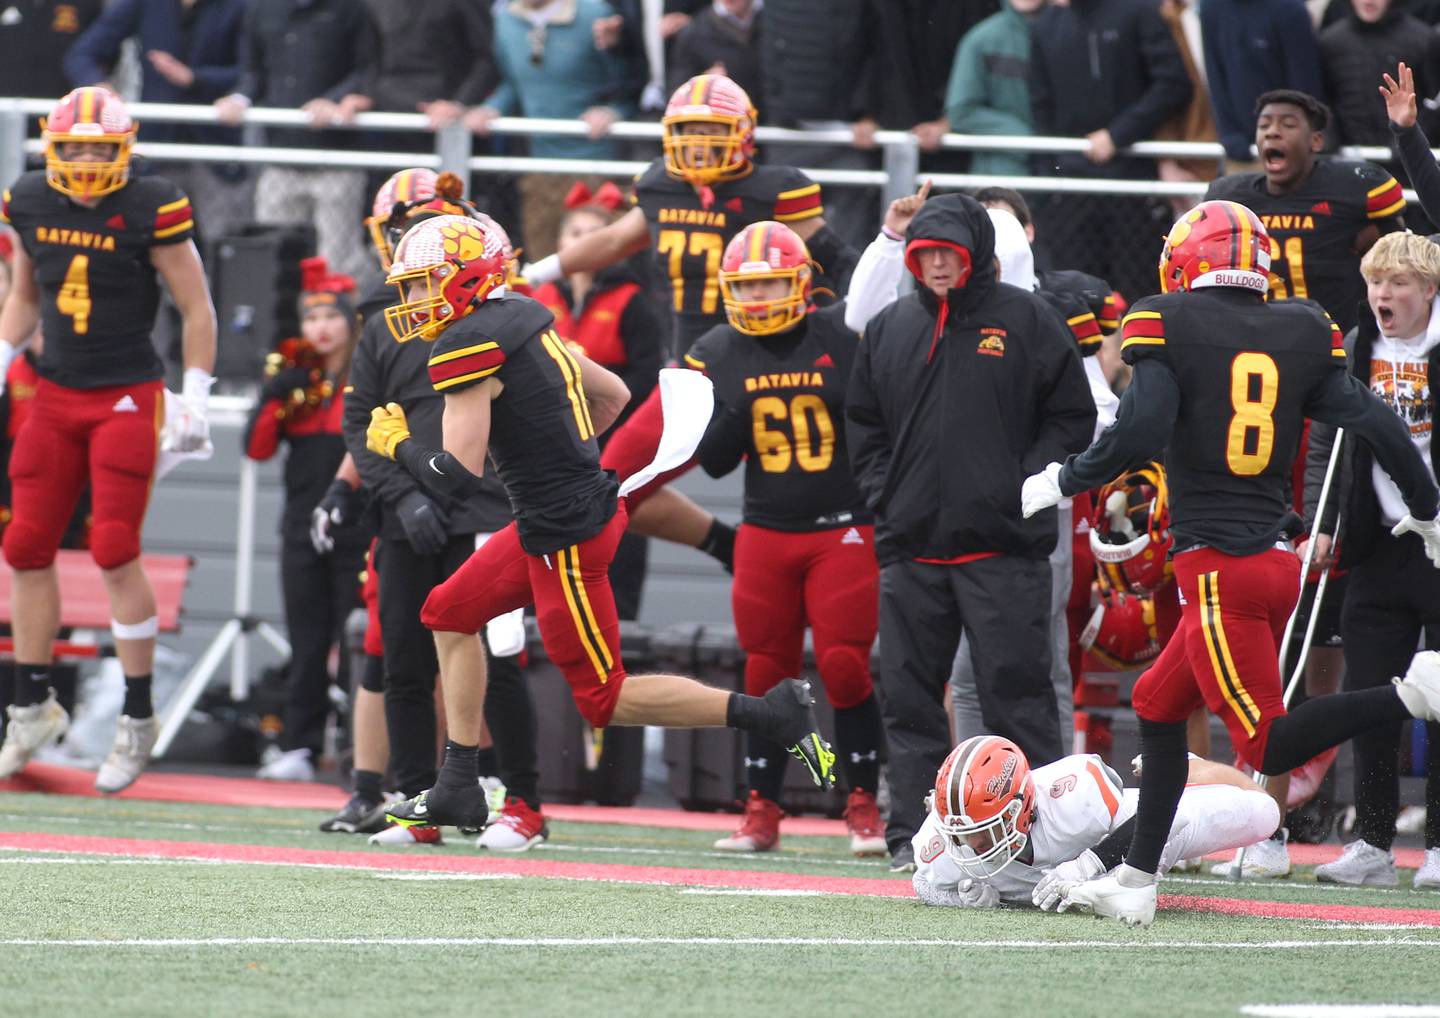 Batavia’s Drew Gerke returns a kick-off 85 yards for a touchdown during their Class 7A second-round playoff game in Batavia against Hersey on Saturday, Nov. 5, 2022.